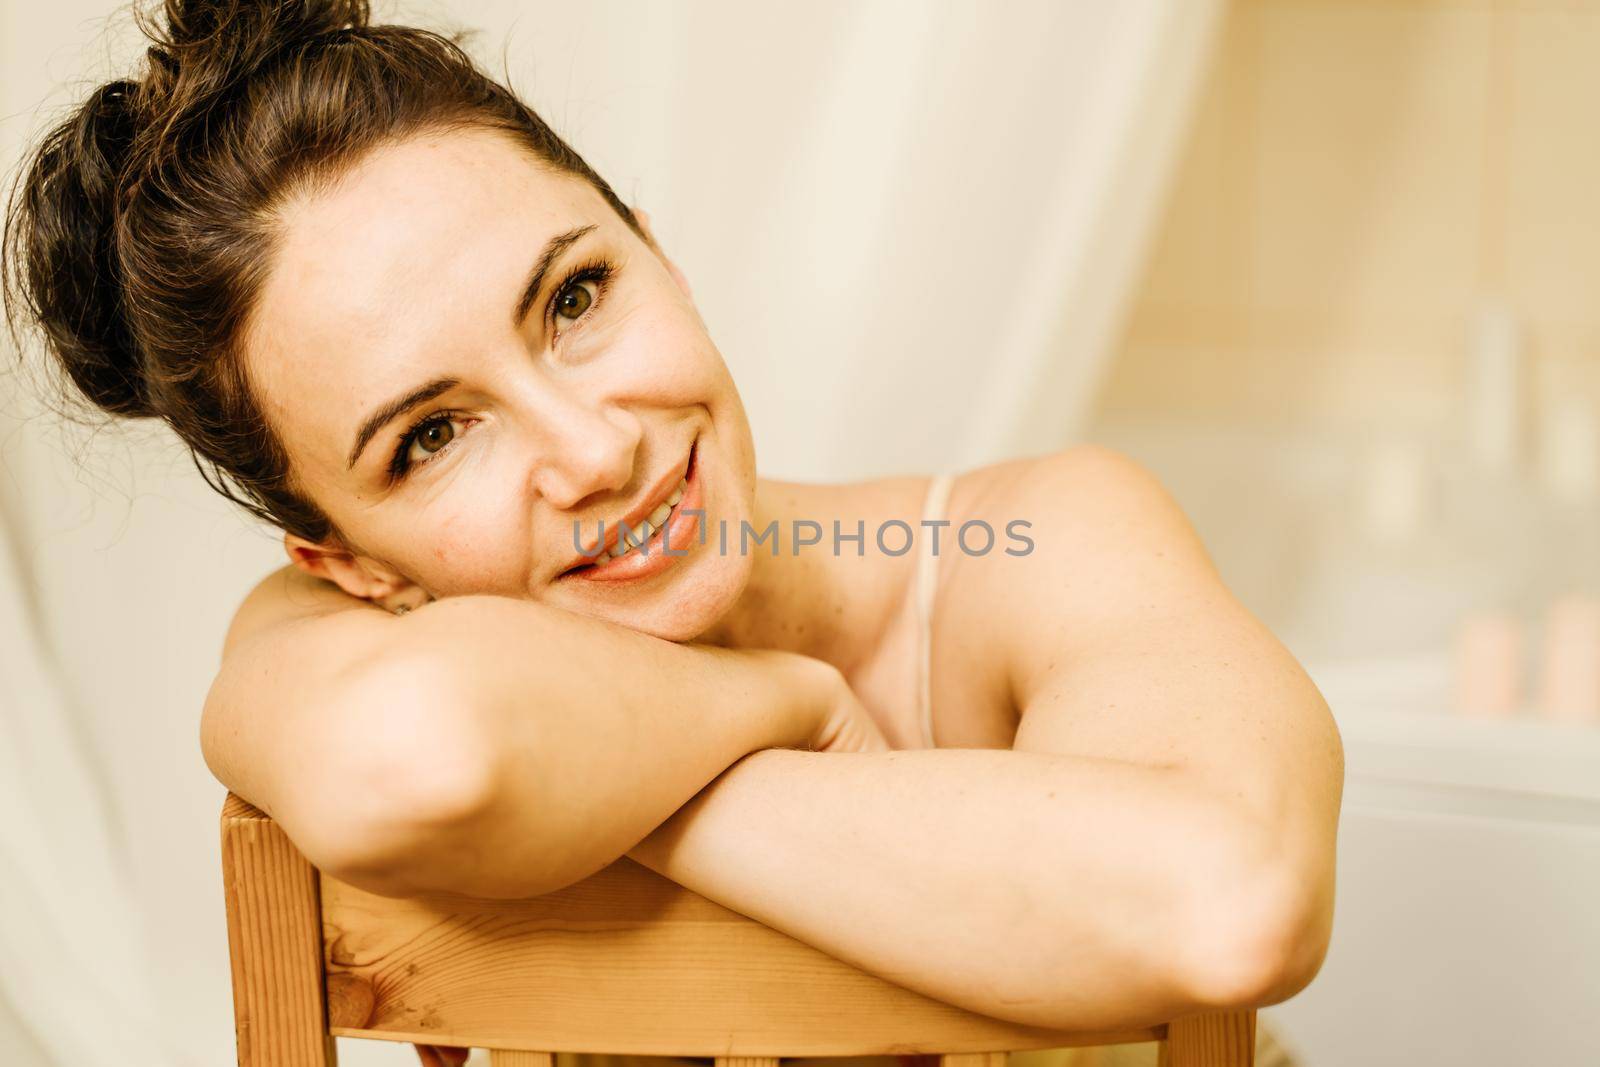 Portrait of a middle-aged woman, smiling with her arms folded in front of her face, her hair pulled up. The brunette is in a good mood. On a light background